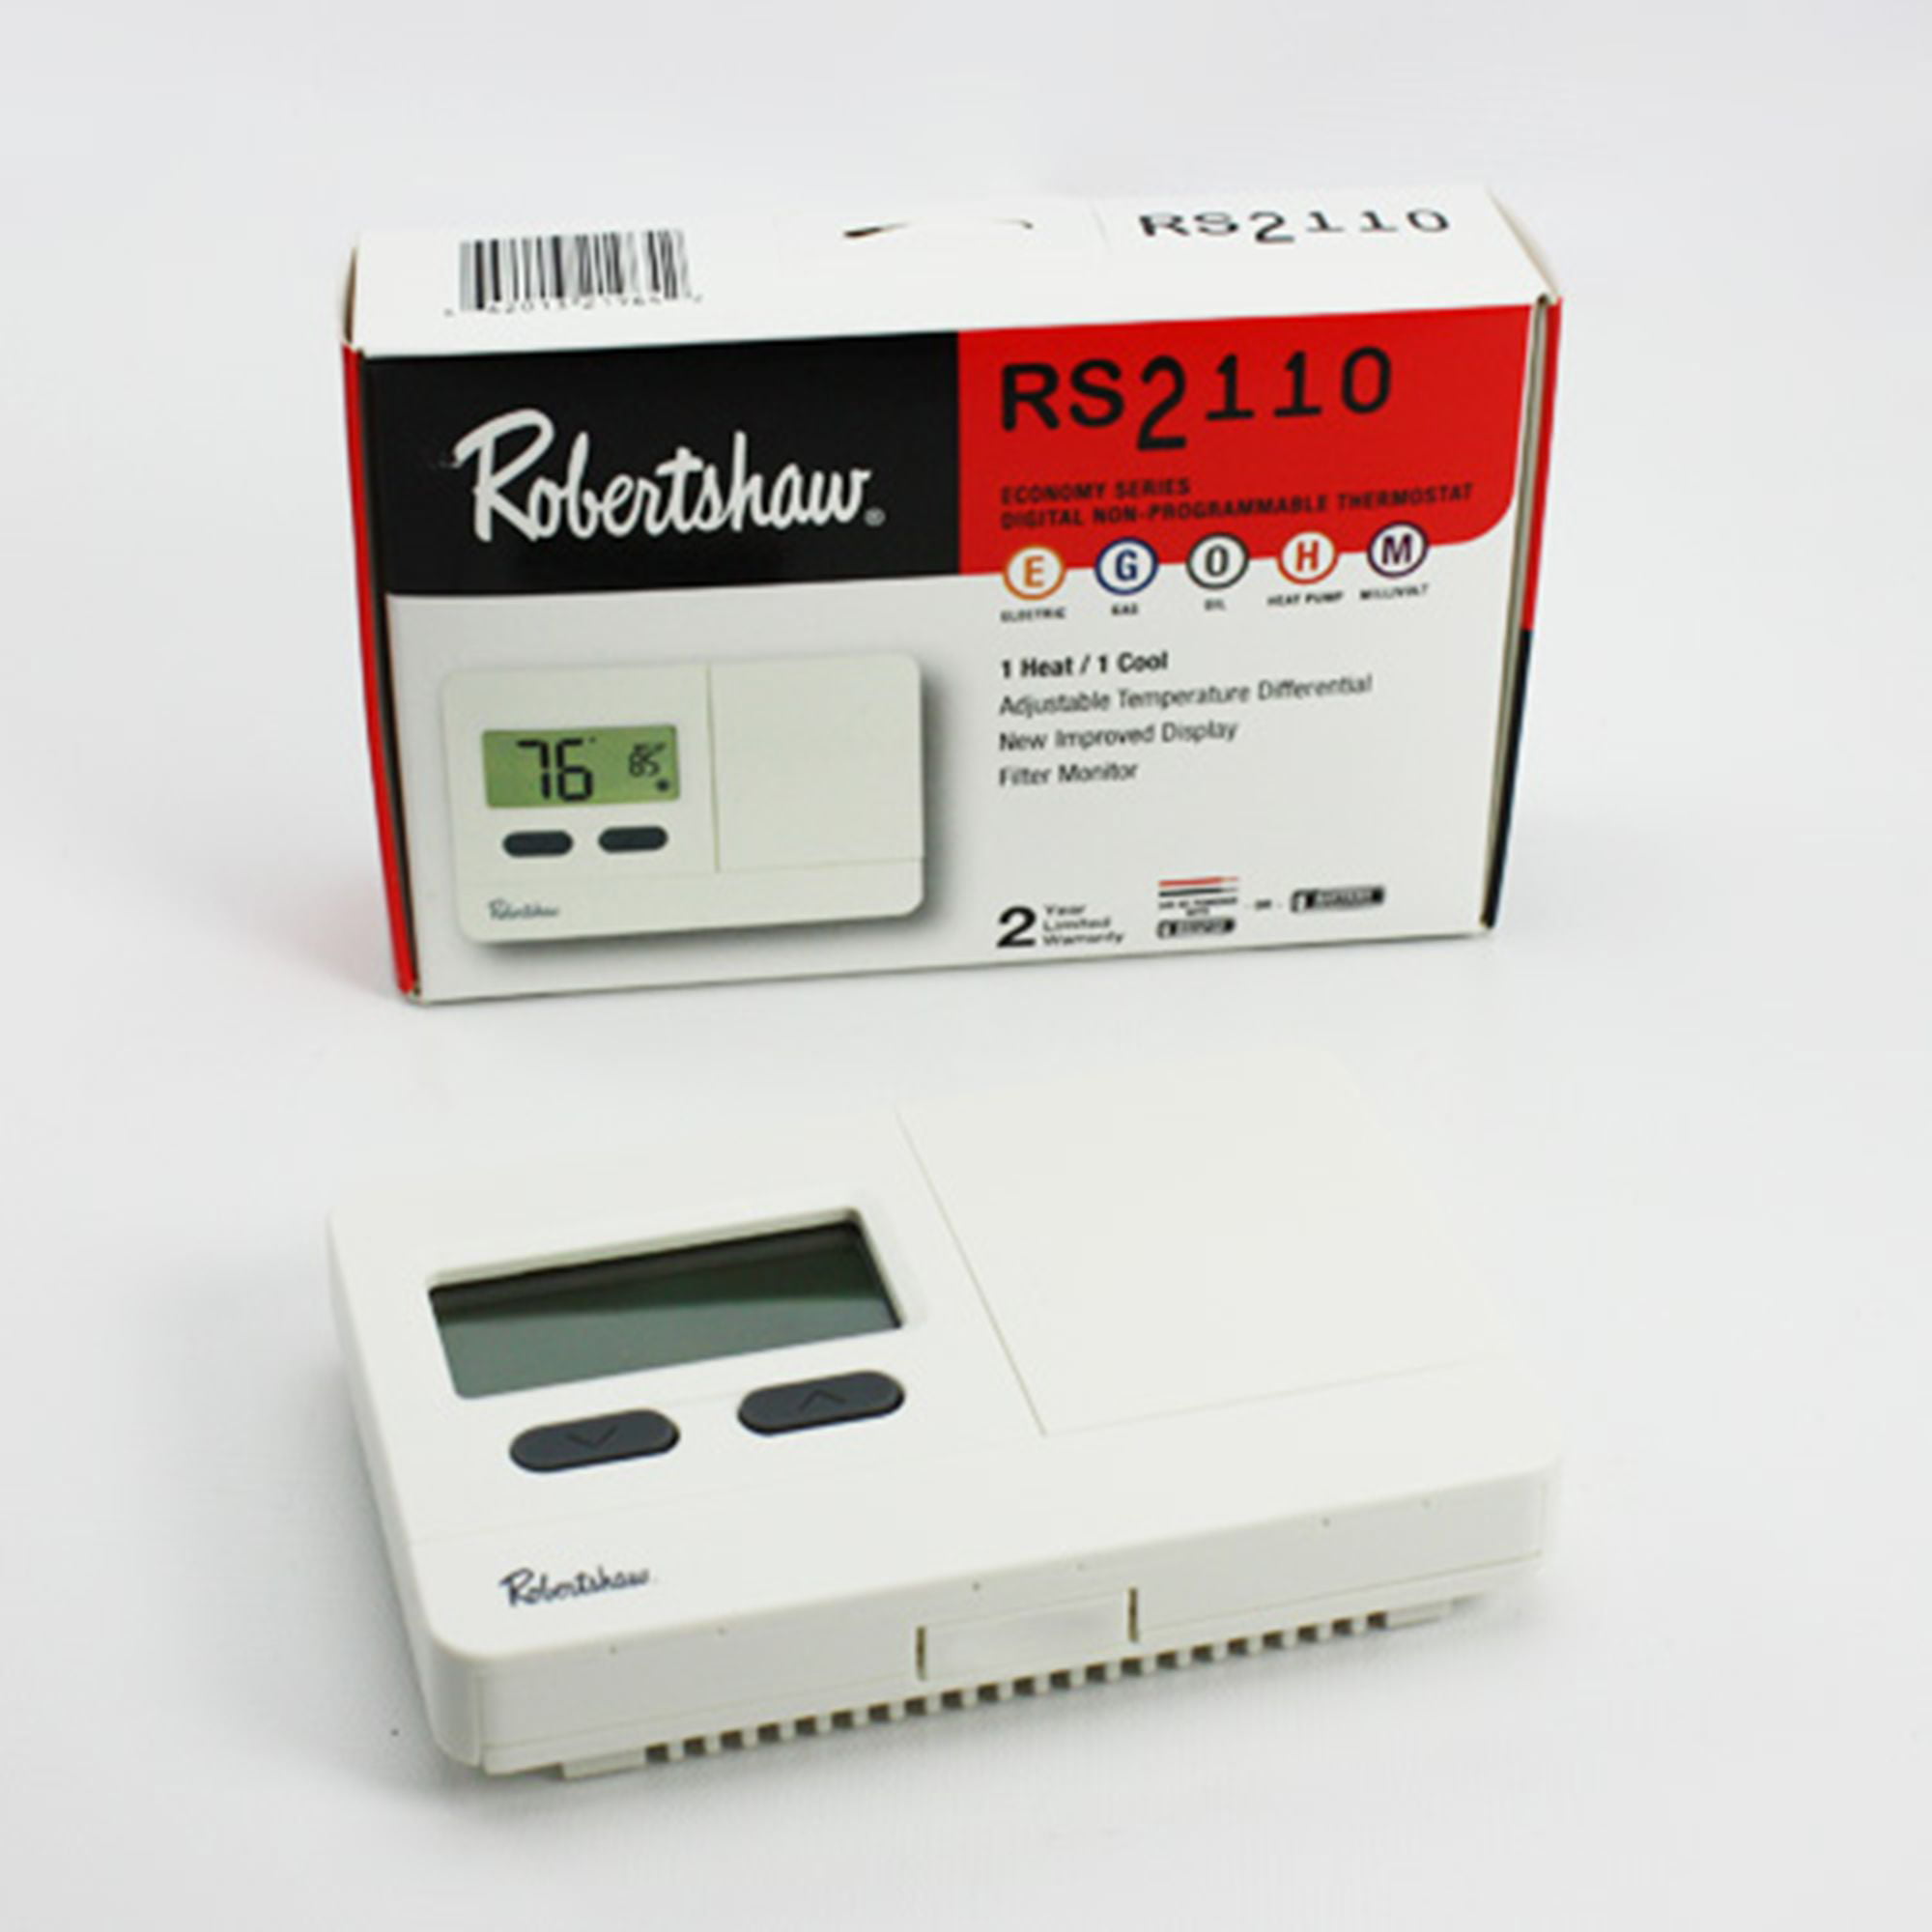 New In Box Robertshaw RS3210 Programmable LCD Wall Thermostat